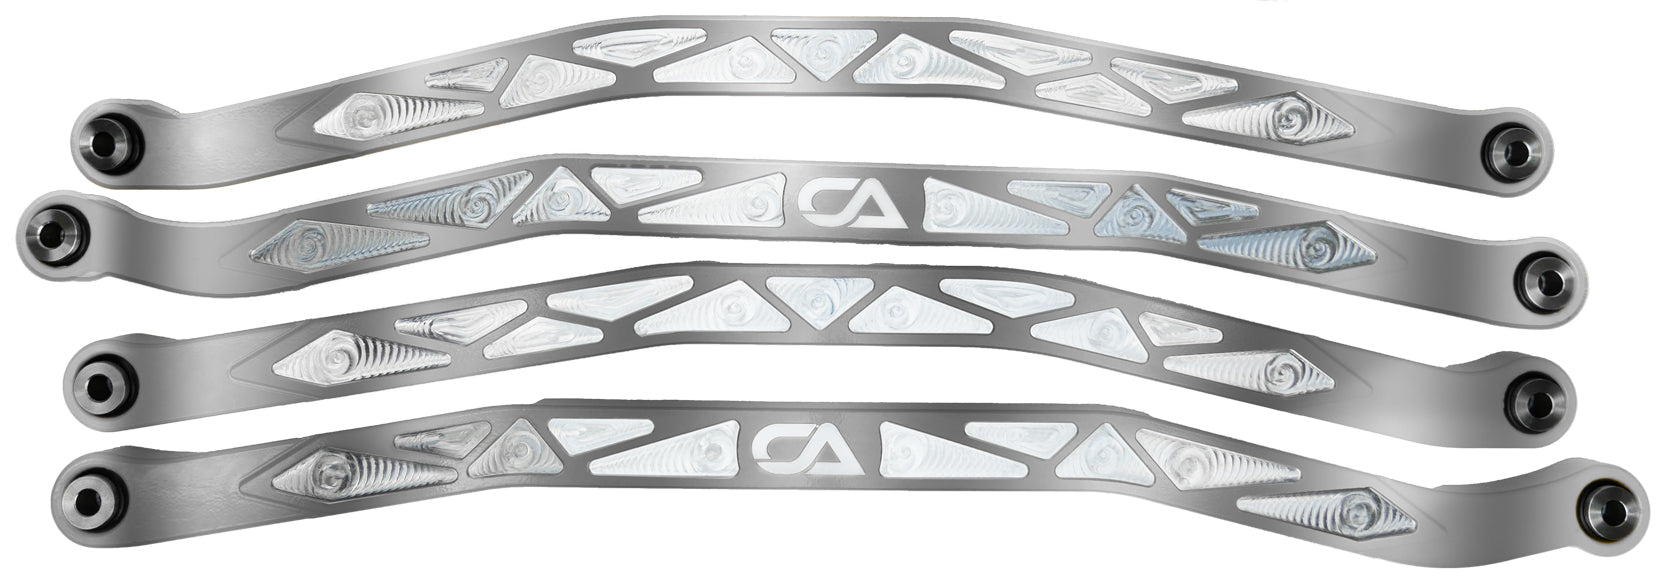 CA Tech USA Cam-Am X3 High Clearance Radius Rods are the largest and thickest rods on the market providing strength, dependability, and affordability. 1.25 inches thick and 1.5 inches high. Built with FK Brand Spherical bearings. Kit contains four high clearance rods for the highest ground clearance.